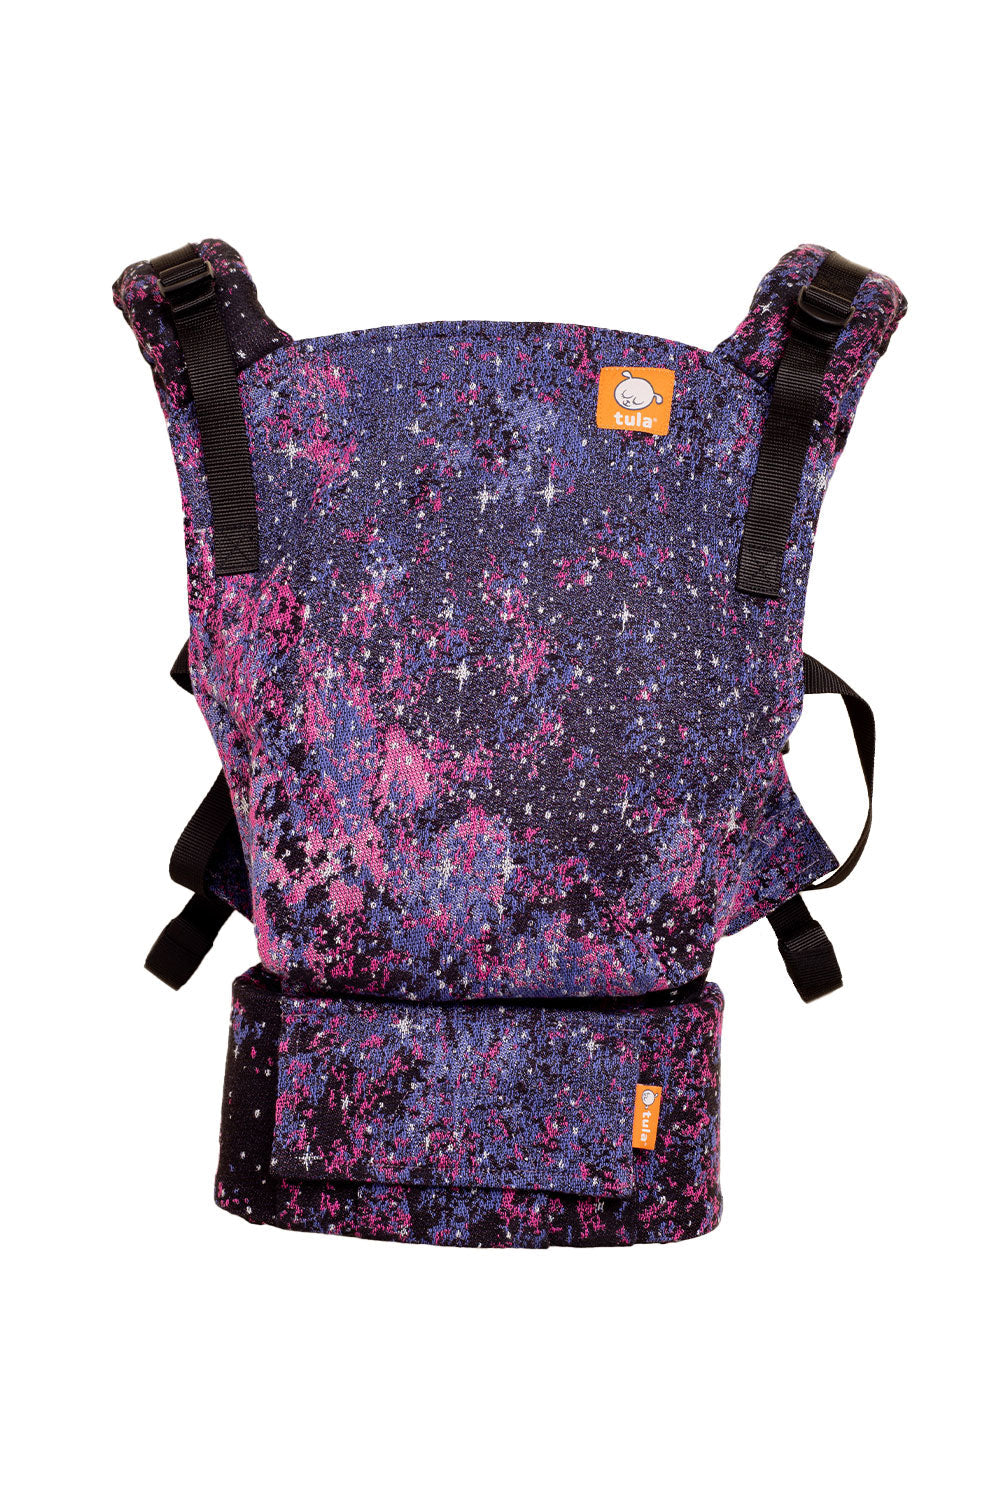 Nebula - Signature Woven Free-to-Grow Baby Carrier